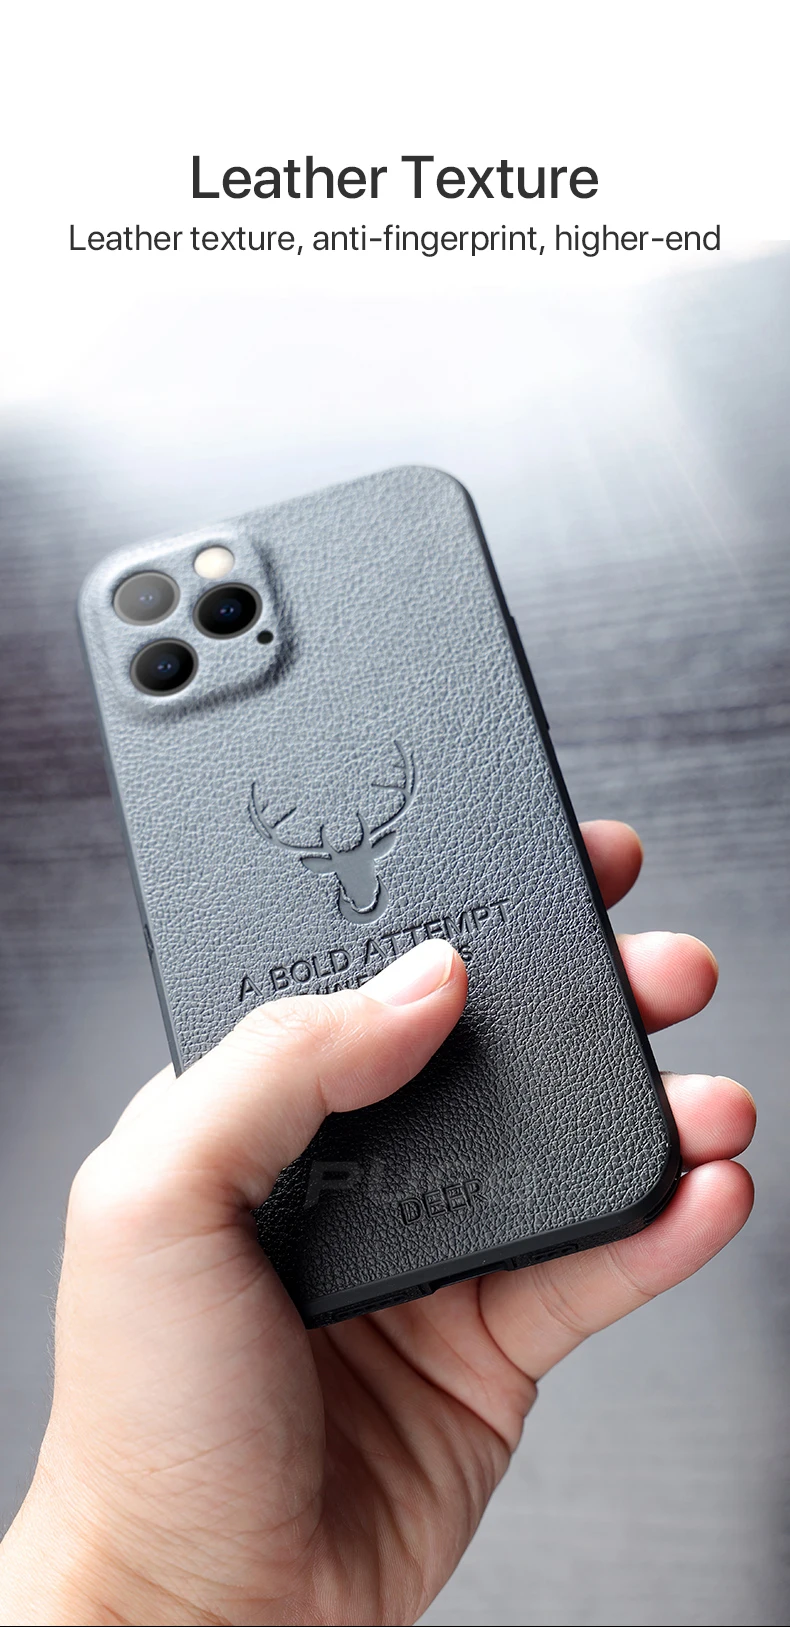 Luxury Square Edge Soft Leather Shockproof Deer Case For iPhone 12 Mini